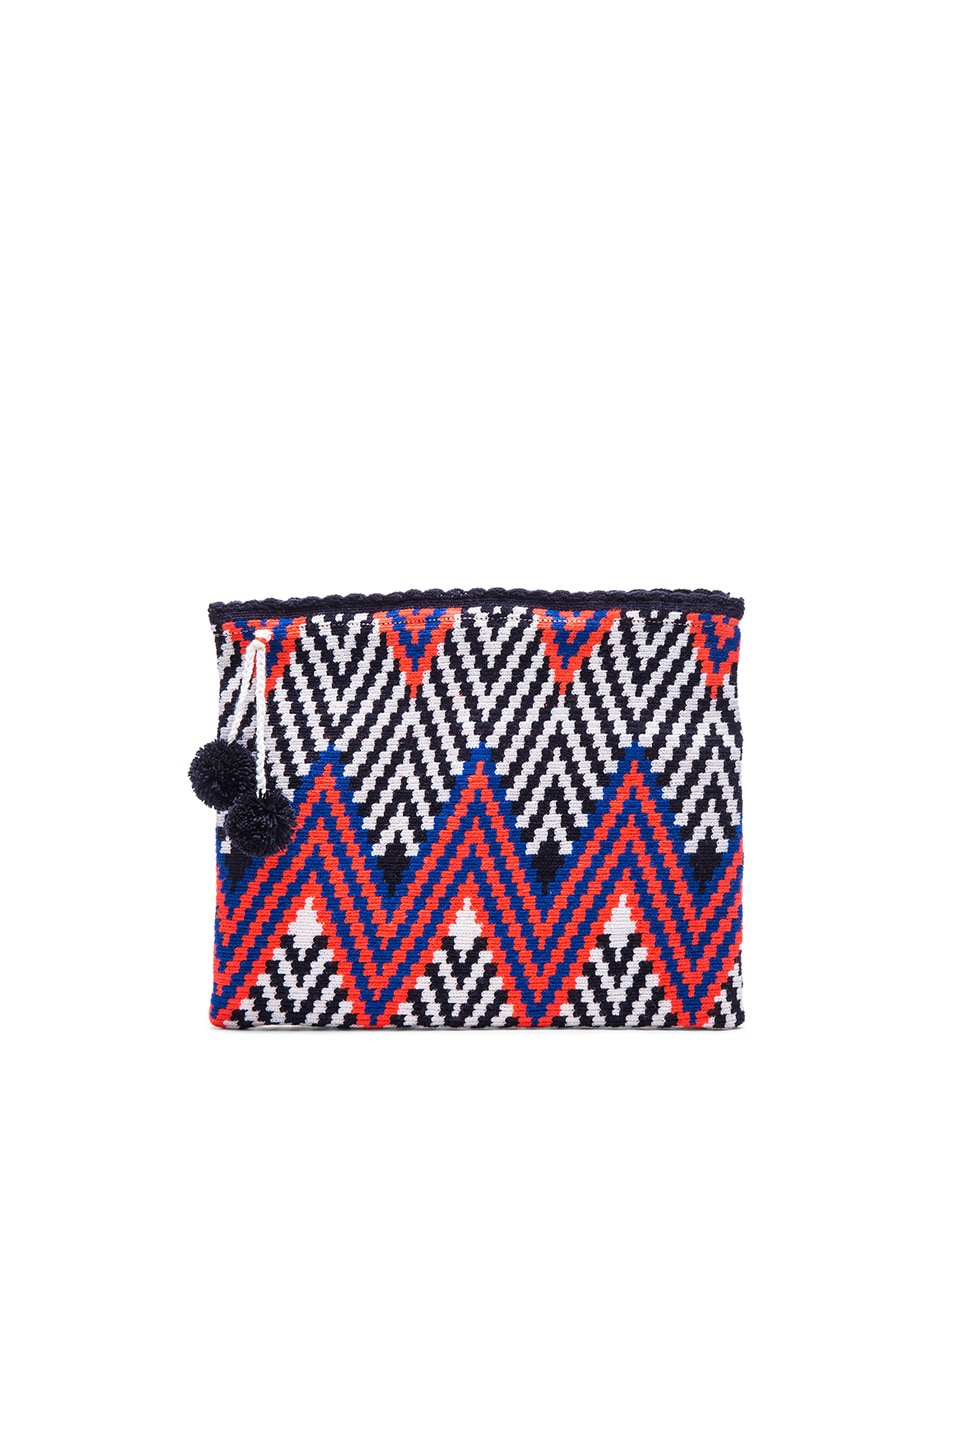 Image 1 of Sophie Anderson Lia 2 Clutch in Coral & Blue Zig Zag